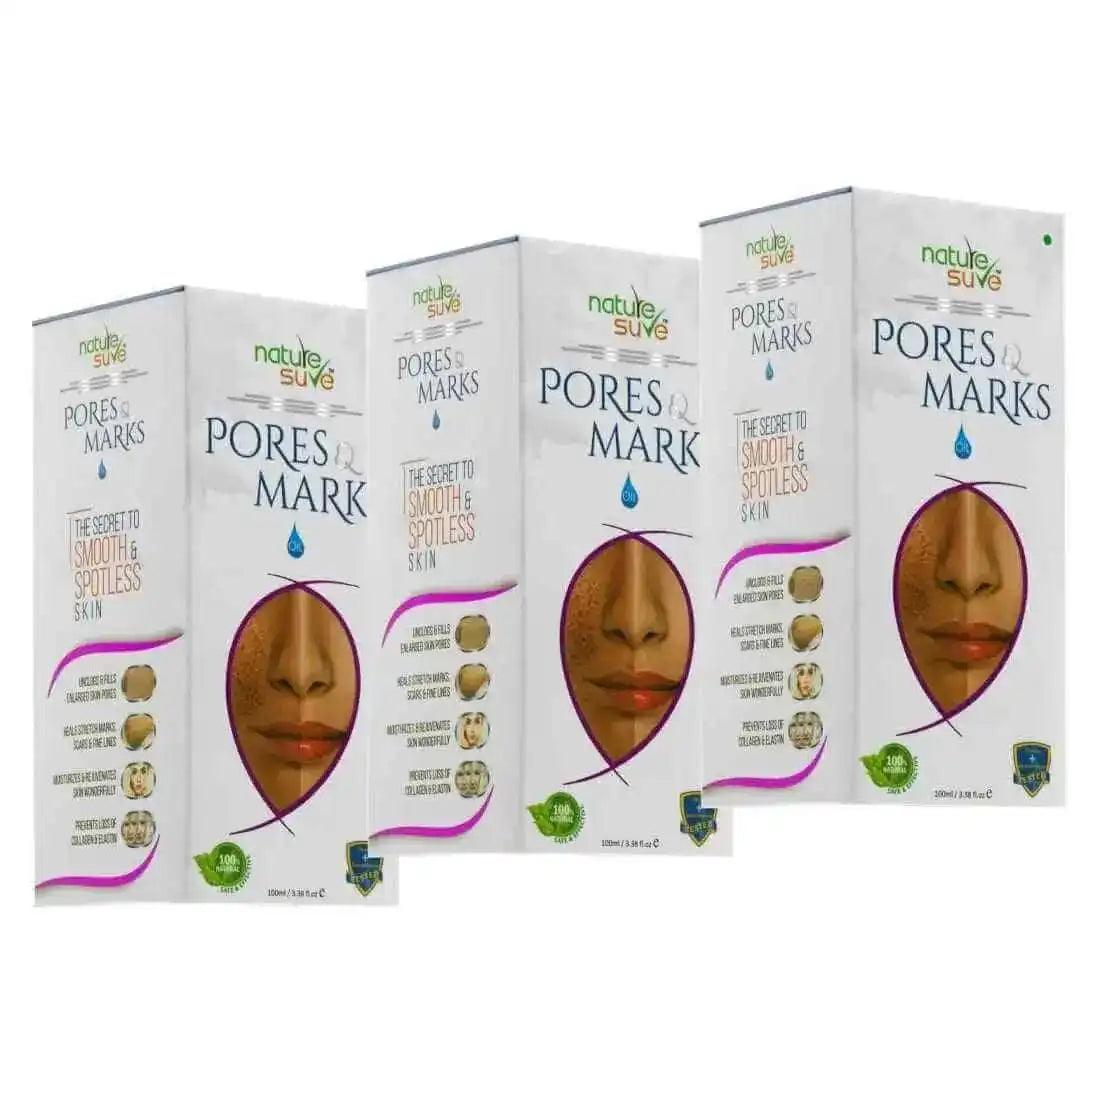 Buy 3 Packs Nature Sure Pores and Marks Oil for Enlarged Skin Pores, Stretch Marks and Fine Lines 8903540009446